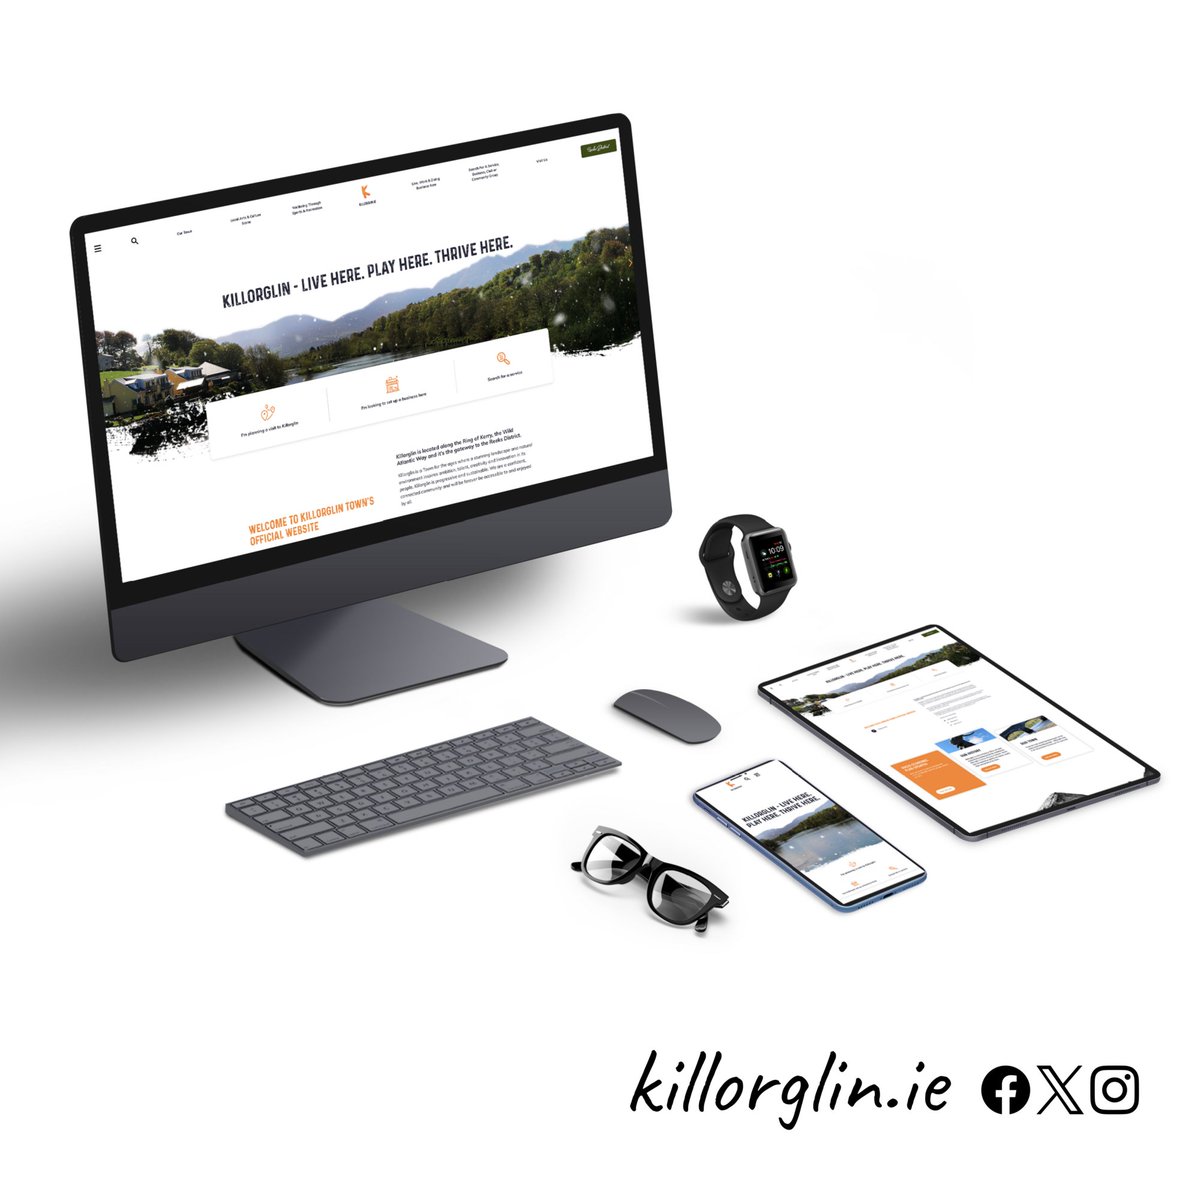 Why not visit our website and explore its many features? Learn about our heritage, town news, business setup tips, and plan your visit ➜ killorglin.ie. 

#Killorglin #LivePlayThriveHere